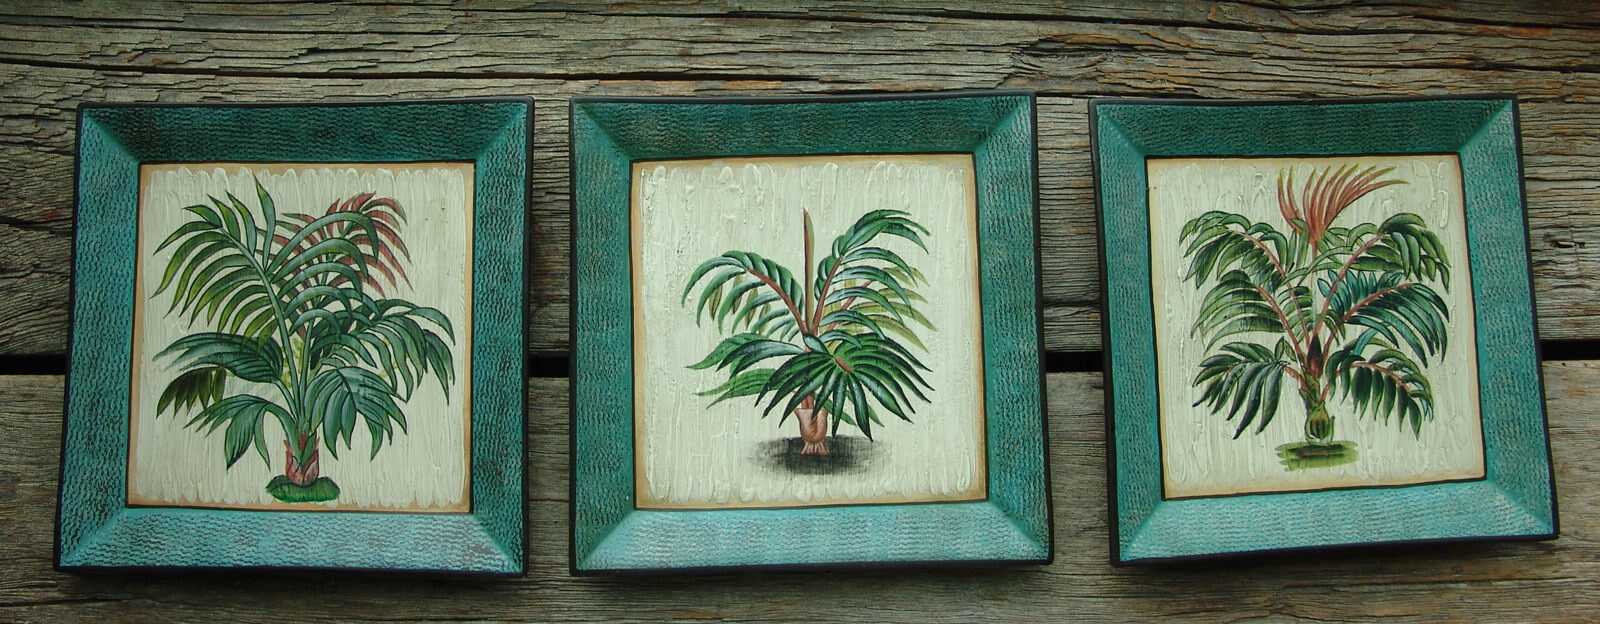 Toyo Plates Lot of 3 Tropical Palm Tree Handpainted Decorative Pictures  - $29.69